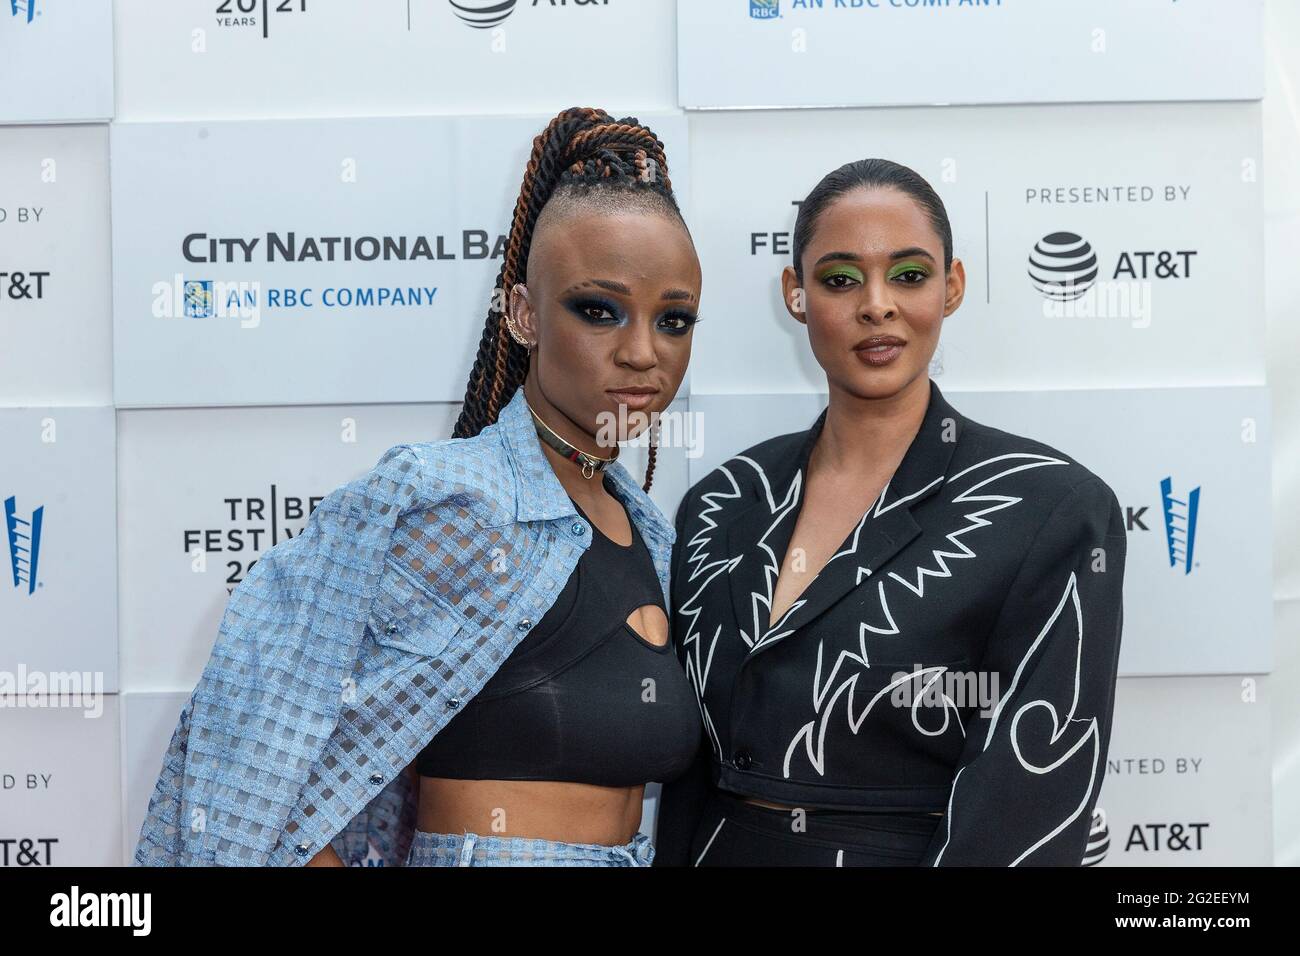 New York, United States. 10th June, 2021. Directors Nneka Ohuorah and Giselle Bailey pose at The Legend of the Underground premiere at Tribeca Film Festival at Waterfront Plaza, Battery Park City (Photo by Lev Radin/Pacific Press) Credit: Pacific Press Media Production Corp./Alamy Live News Stock Photo